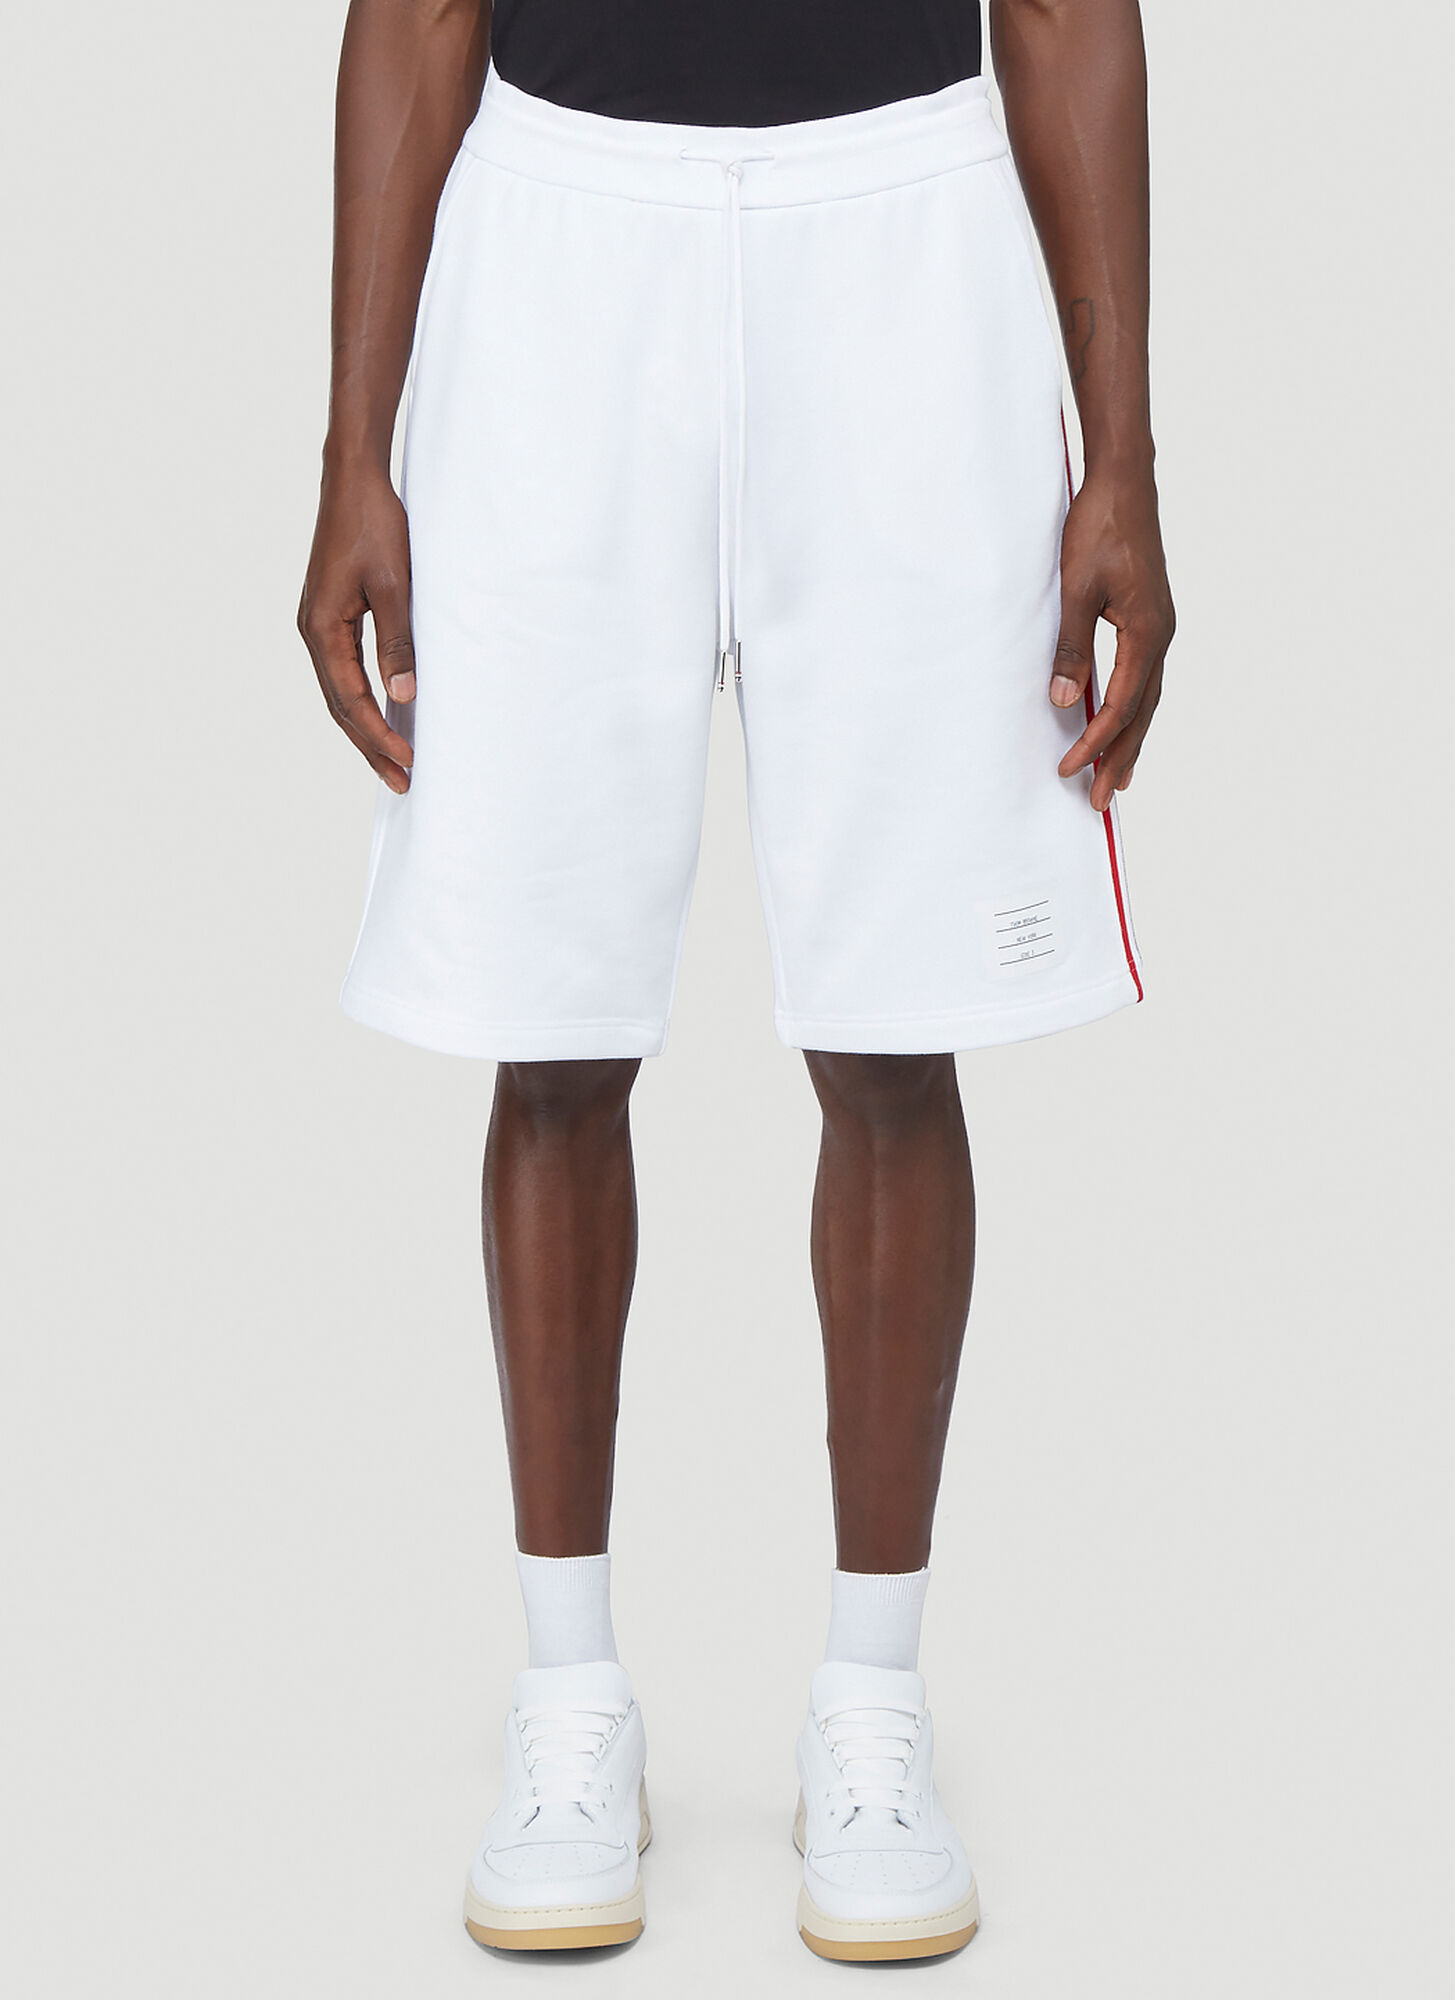 Thom Browne Signature-Stripe Jersey Shorts in White size JPN - 5 | The ...